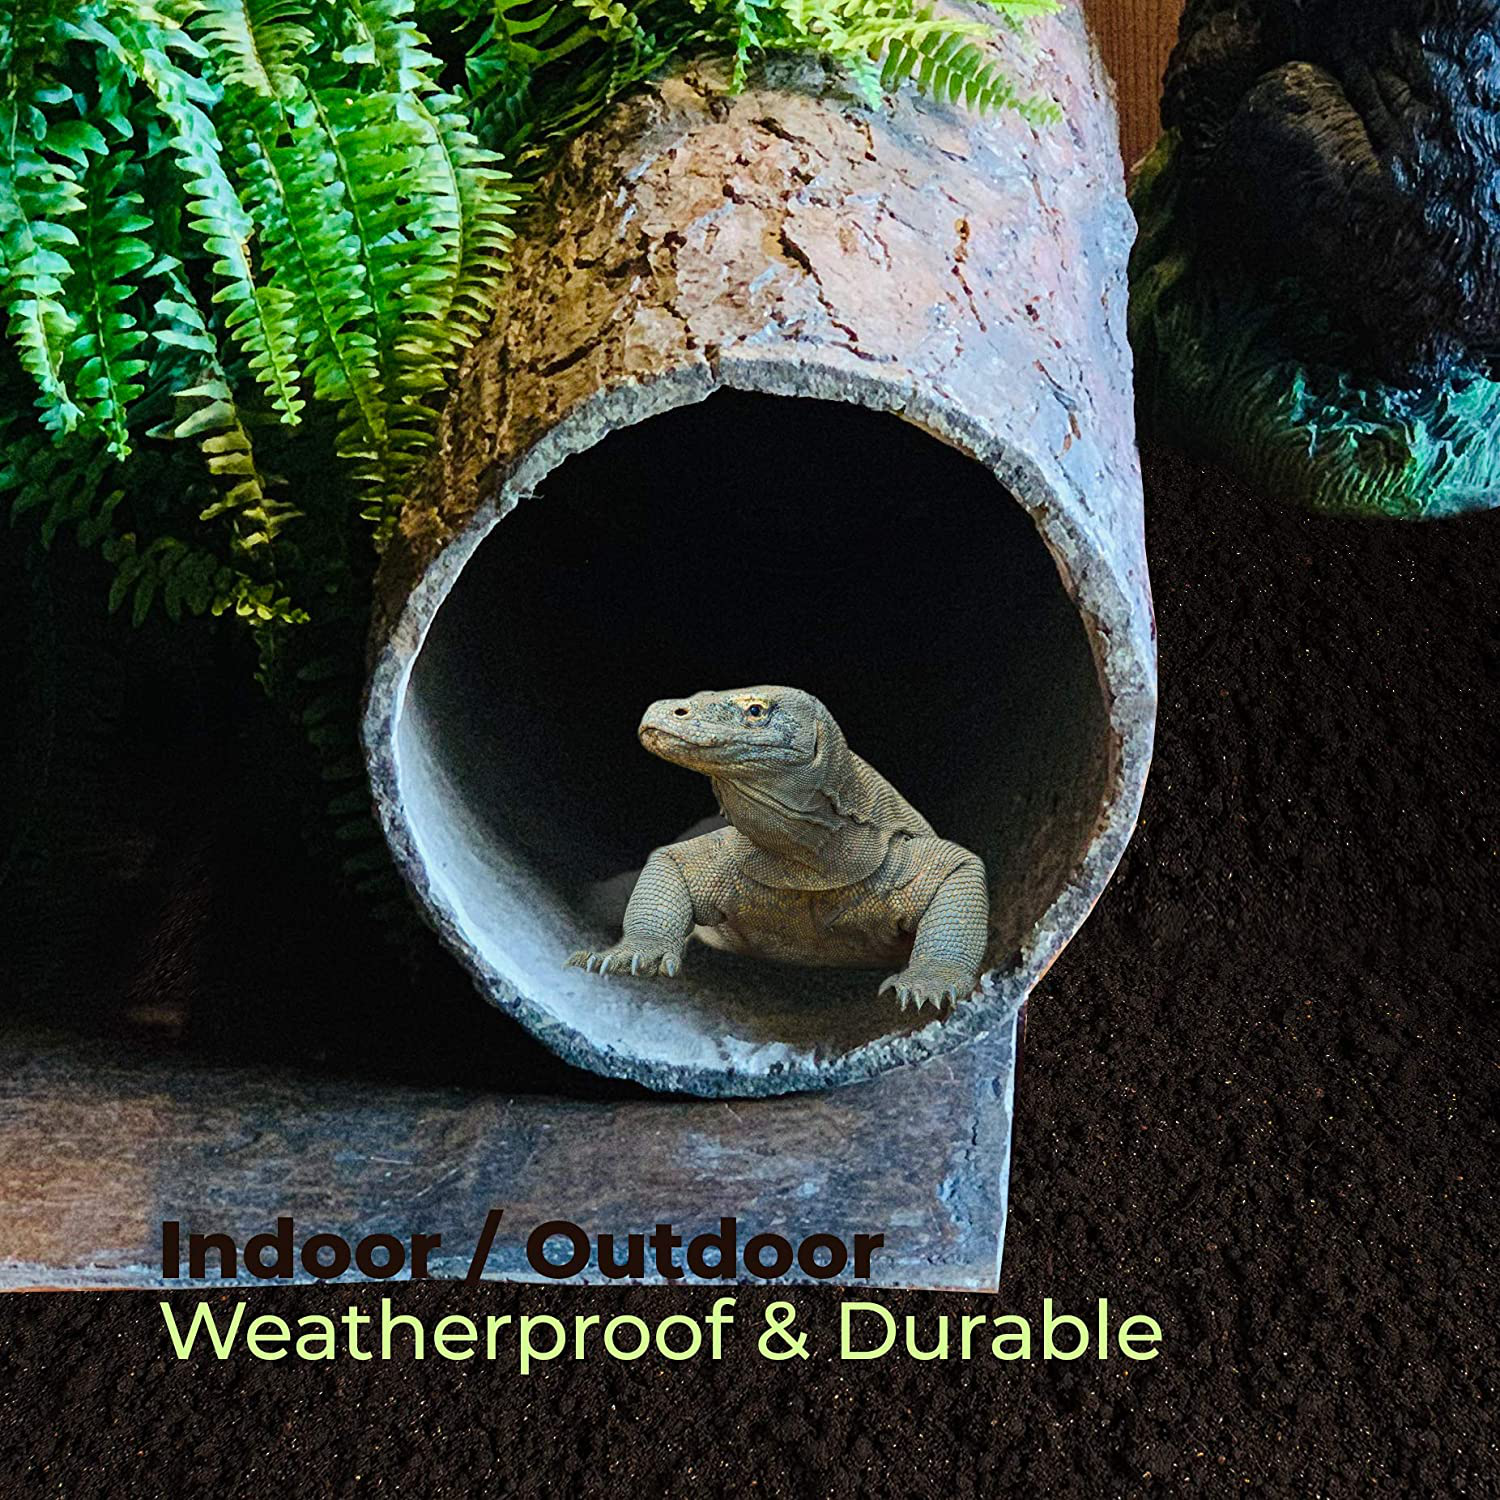 Hollow Hideaway 🌳 Large Tree Stump Reptile Hideout for Snakes, Lizards, Turtles and Critters. Animals & Pet Supplies > Pet Supplies > Reptile & Amphibian Supplies > Reptile & Amphibian Habitat Accessories Hollow Hideaway   